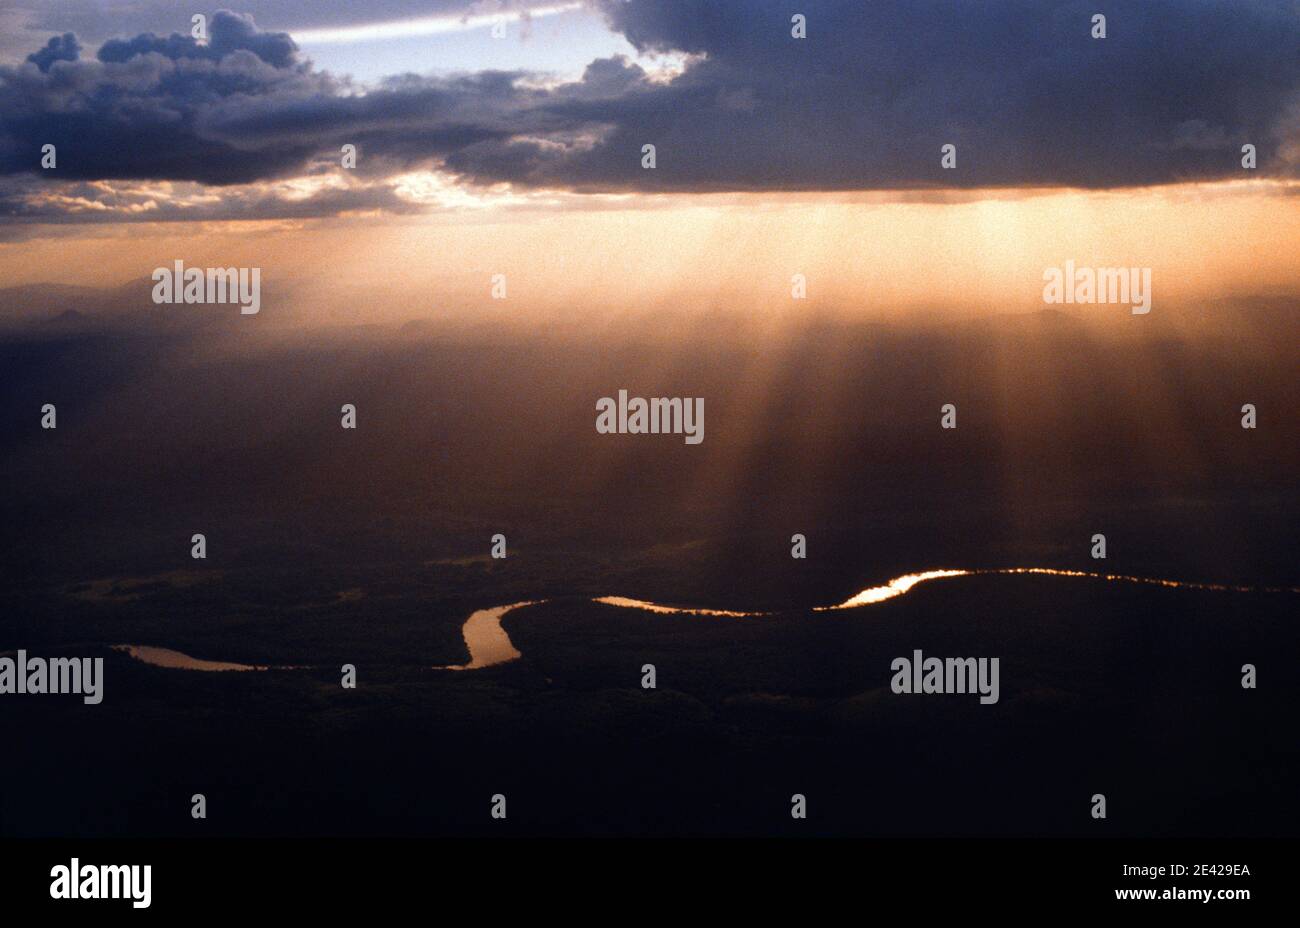 Aerial view of sinuous river in Amazon rain forest, solar rays through clouds at susnset, Brazil. Stock Photo